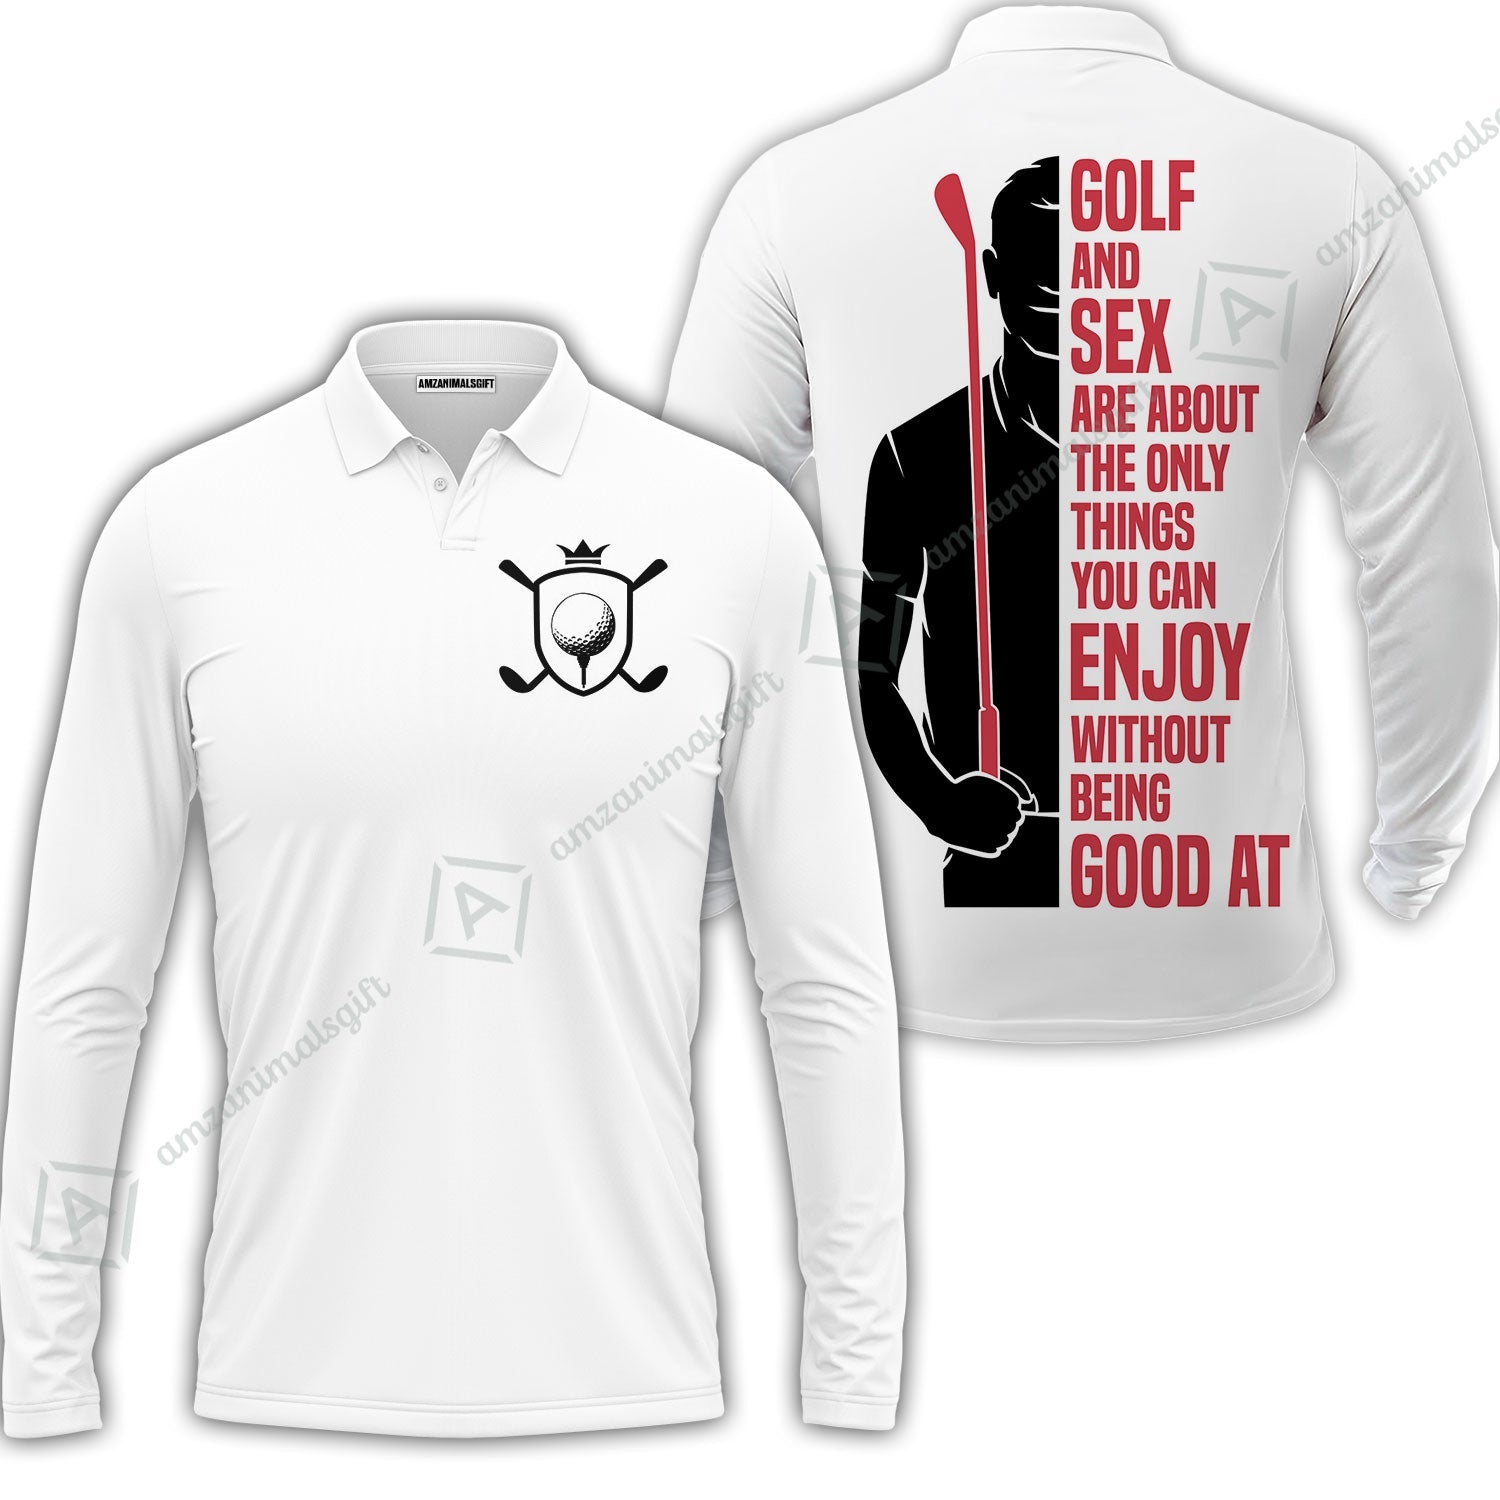 Golf Long Polo Shirt - Golf And Sex Are About The Only Things You Can Enjoy Without Being Good At Polo Shirt,True Golf Long Polo Shirt